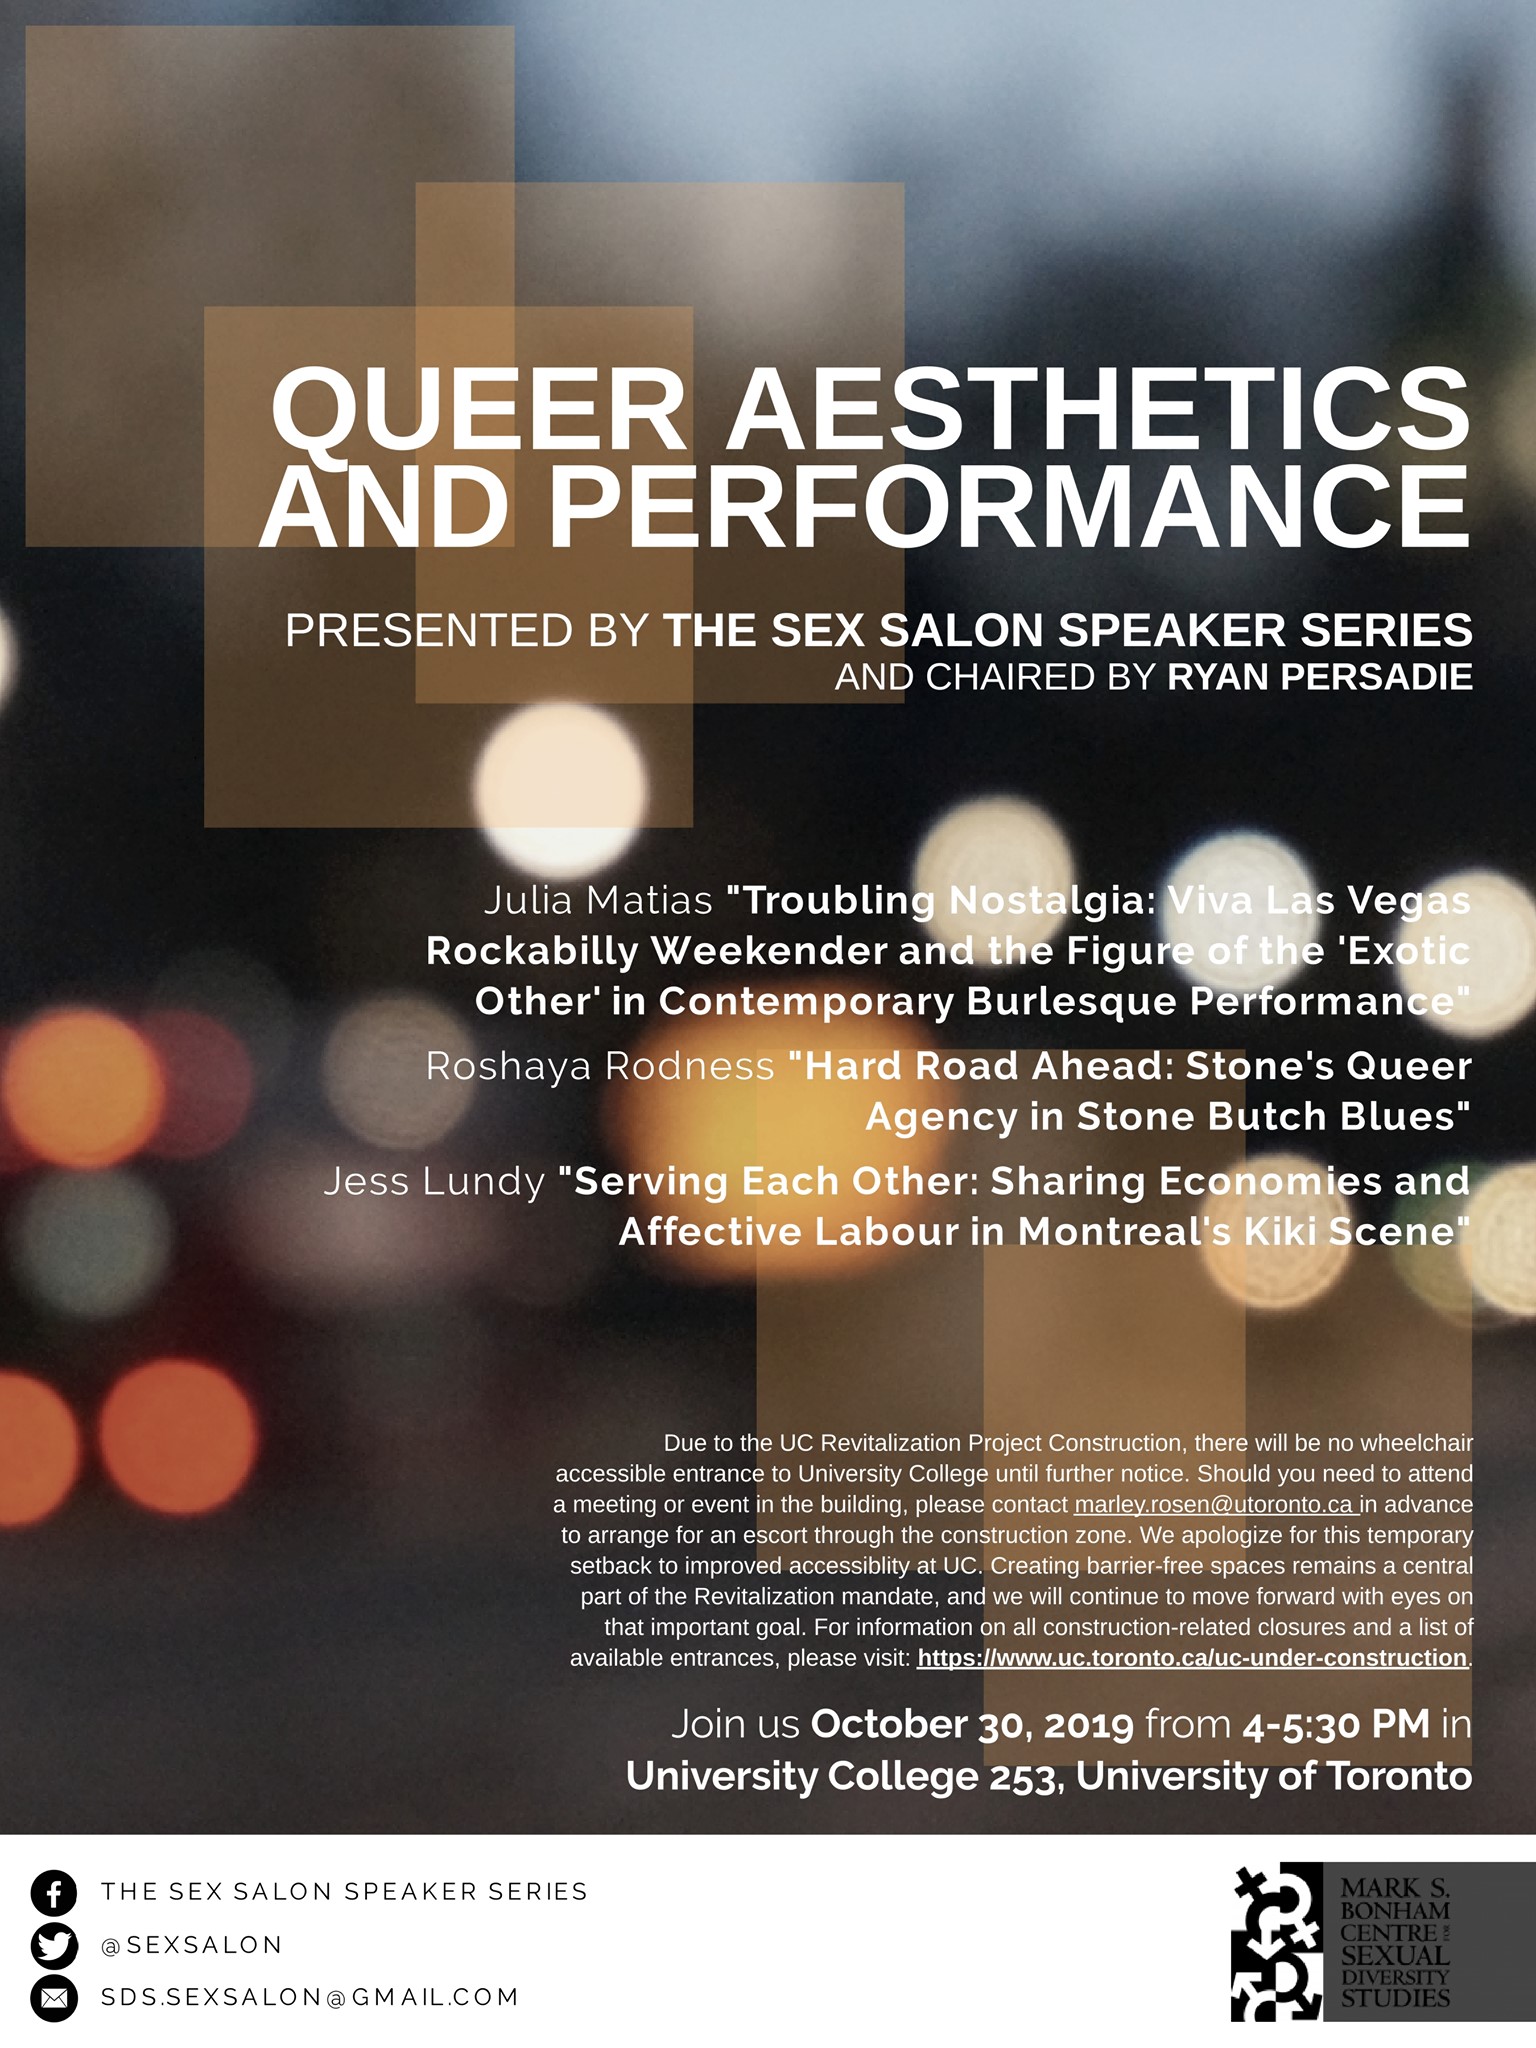 Sex Salon: Queer Aesthetics and Performance